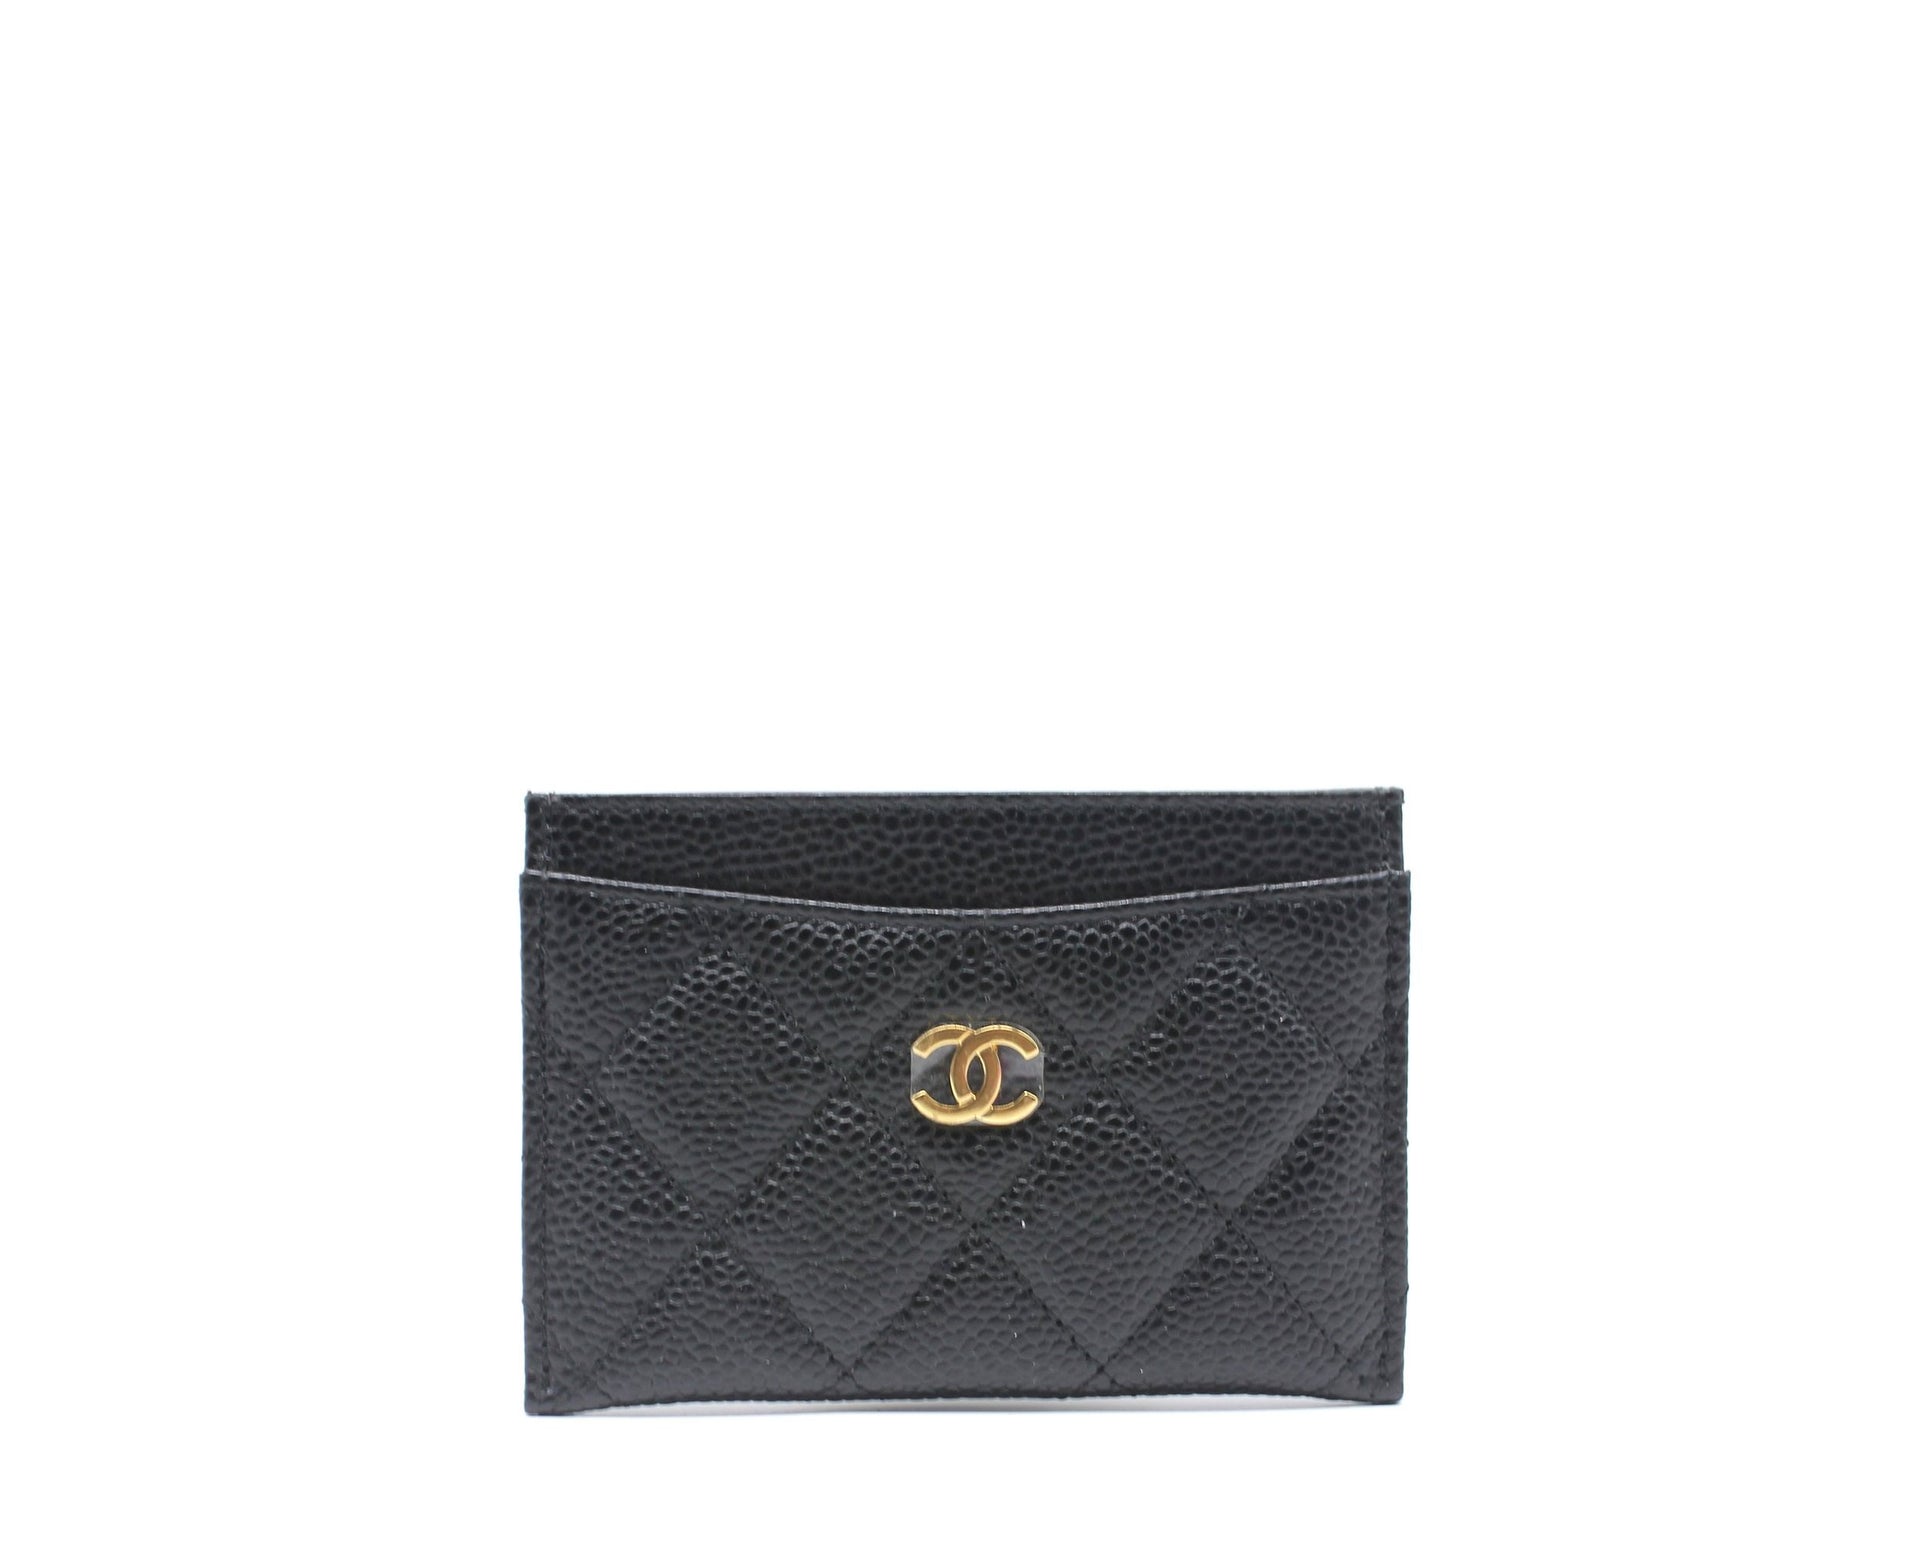 CHANEL Caviar Metal Perforated Quilted CC Flap Card Holder Black